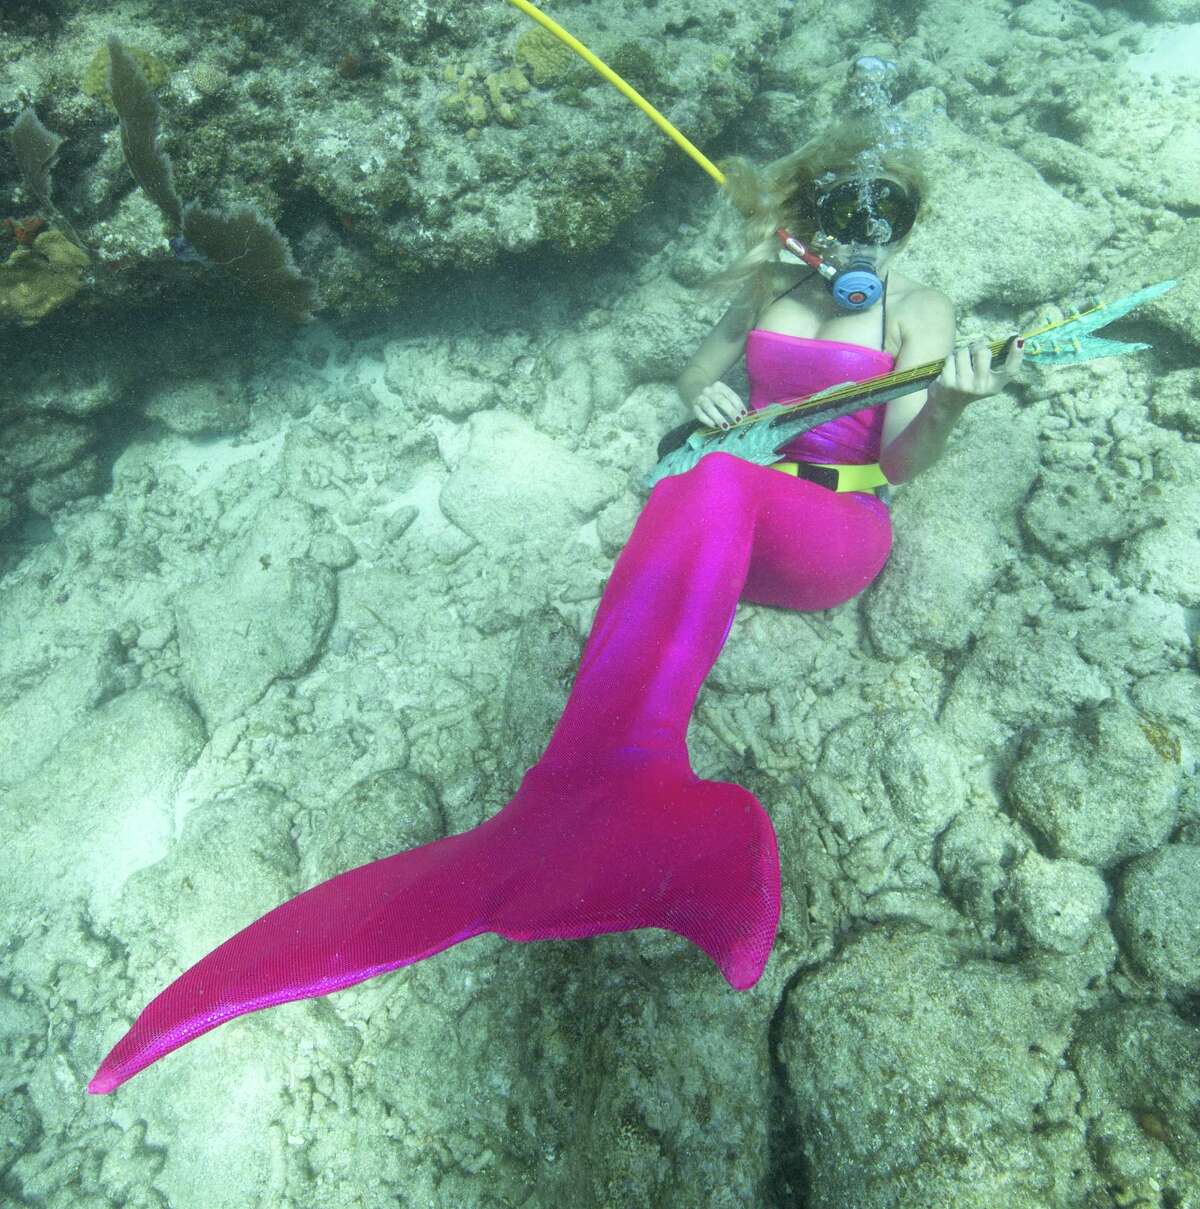 In this photo provided by the Florida Keys News Bureau, Samantha Langsdale, costumed as a mermaid, pretends to play a mock musical instrument at the Lower Keys Underwater Music Festival on Saturday, July 12, 2014, in the Florida Keys National Marine Sanctuary. The subsea concert at Looe Key Reef, about six miles south of Big Pine Key, Fla., attracted nearly 500 divers and snorkelers to listen to a local radio station's four-hour broadcast piped beneath the sea via underwater speakers. (AP Photo/Florida Keys News Bureau, Bob Care)